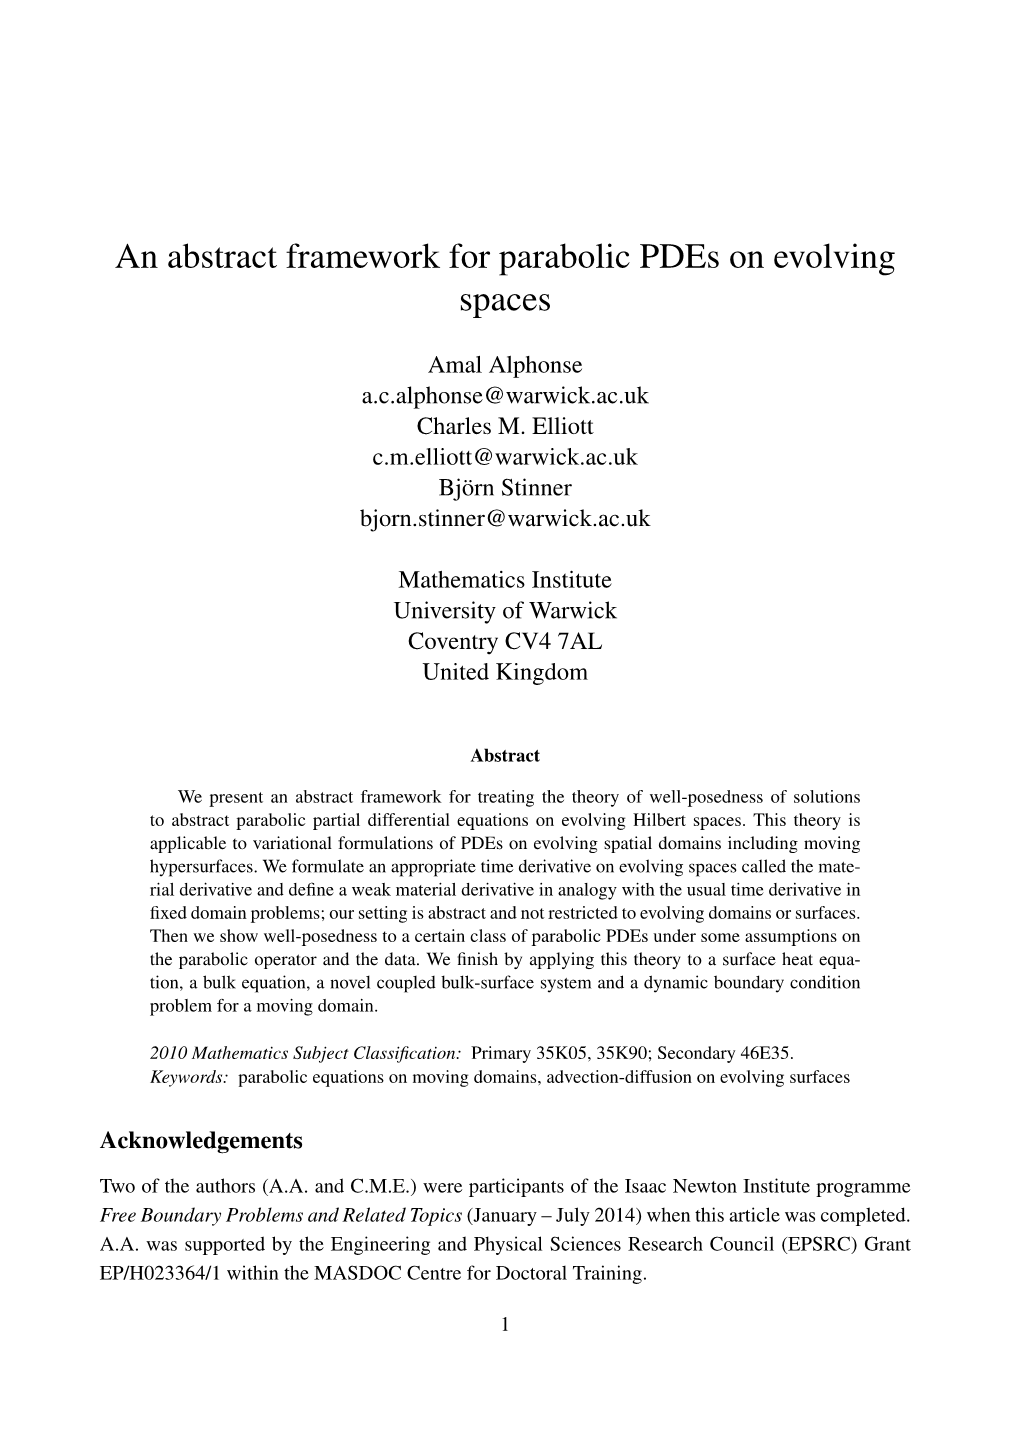 An Abstract Framework for Parabolic Pdes on Evolving Spaces